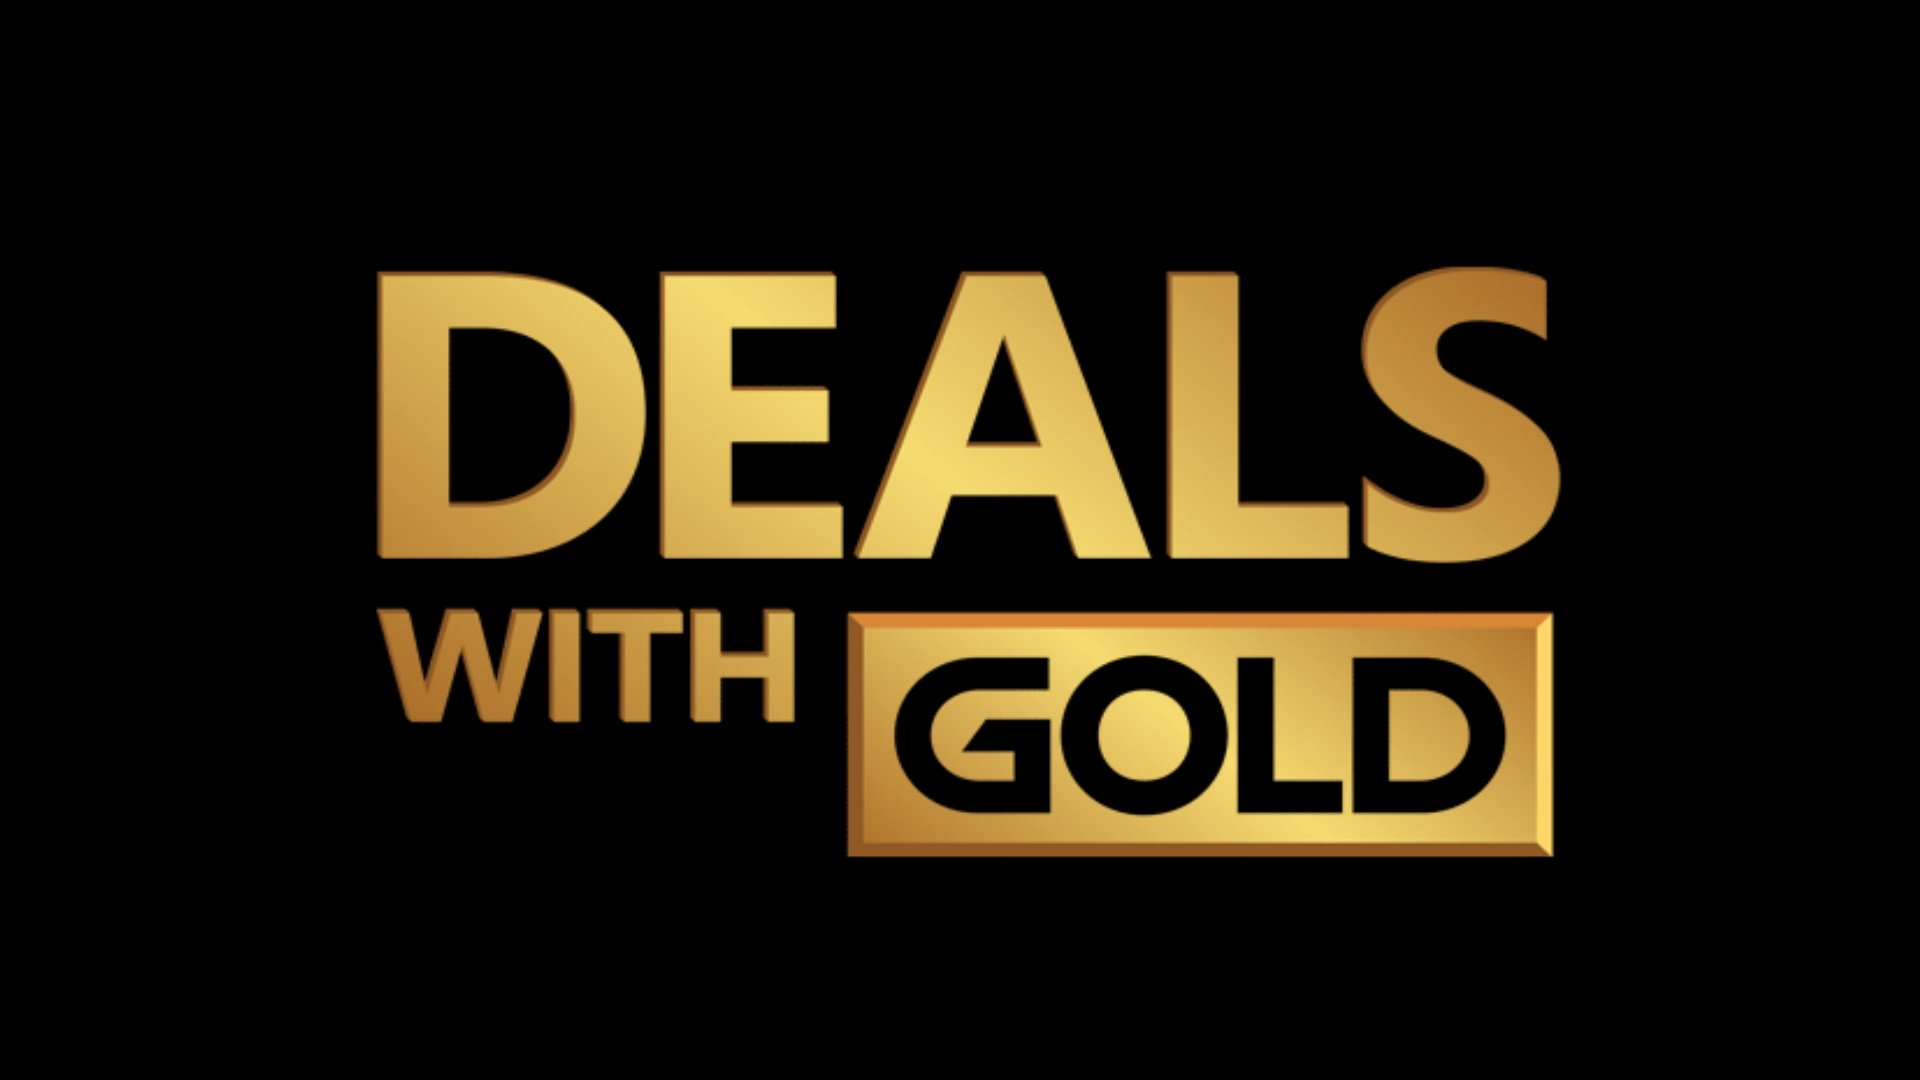 This Week’s Deals with Gold and Spotlight Sale (Week of October 10)